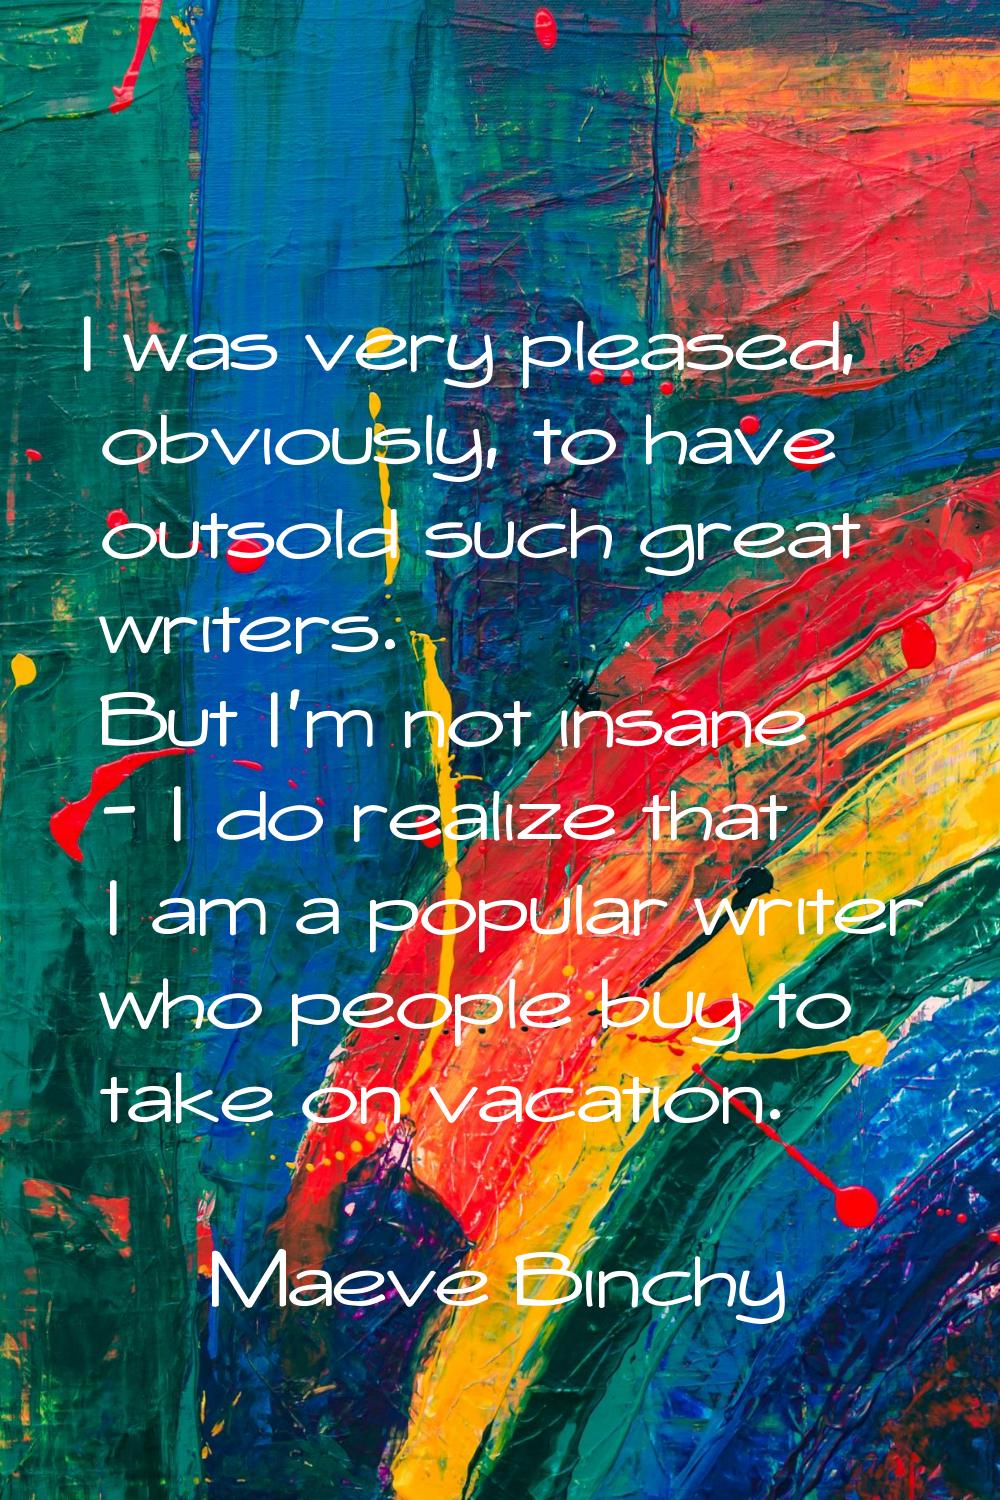 I was very pleased, obviously, to have outsold such great writers. But I'm not insane - I do realiz